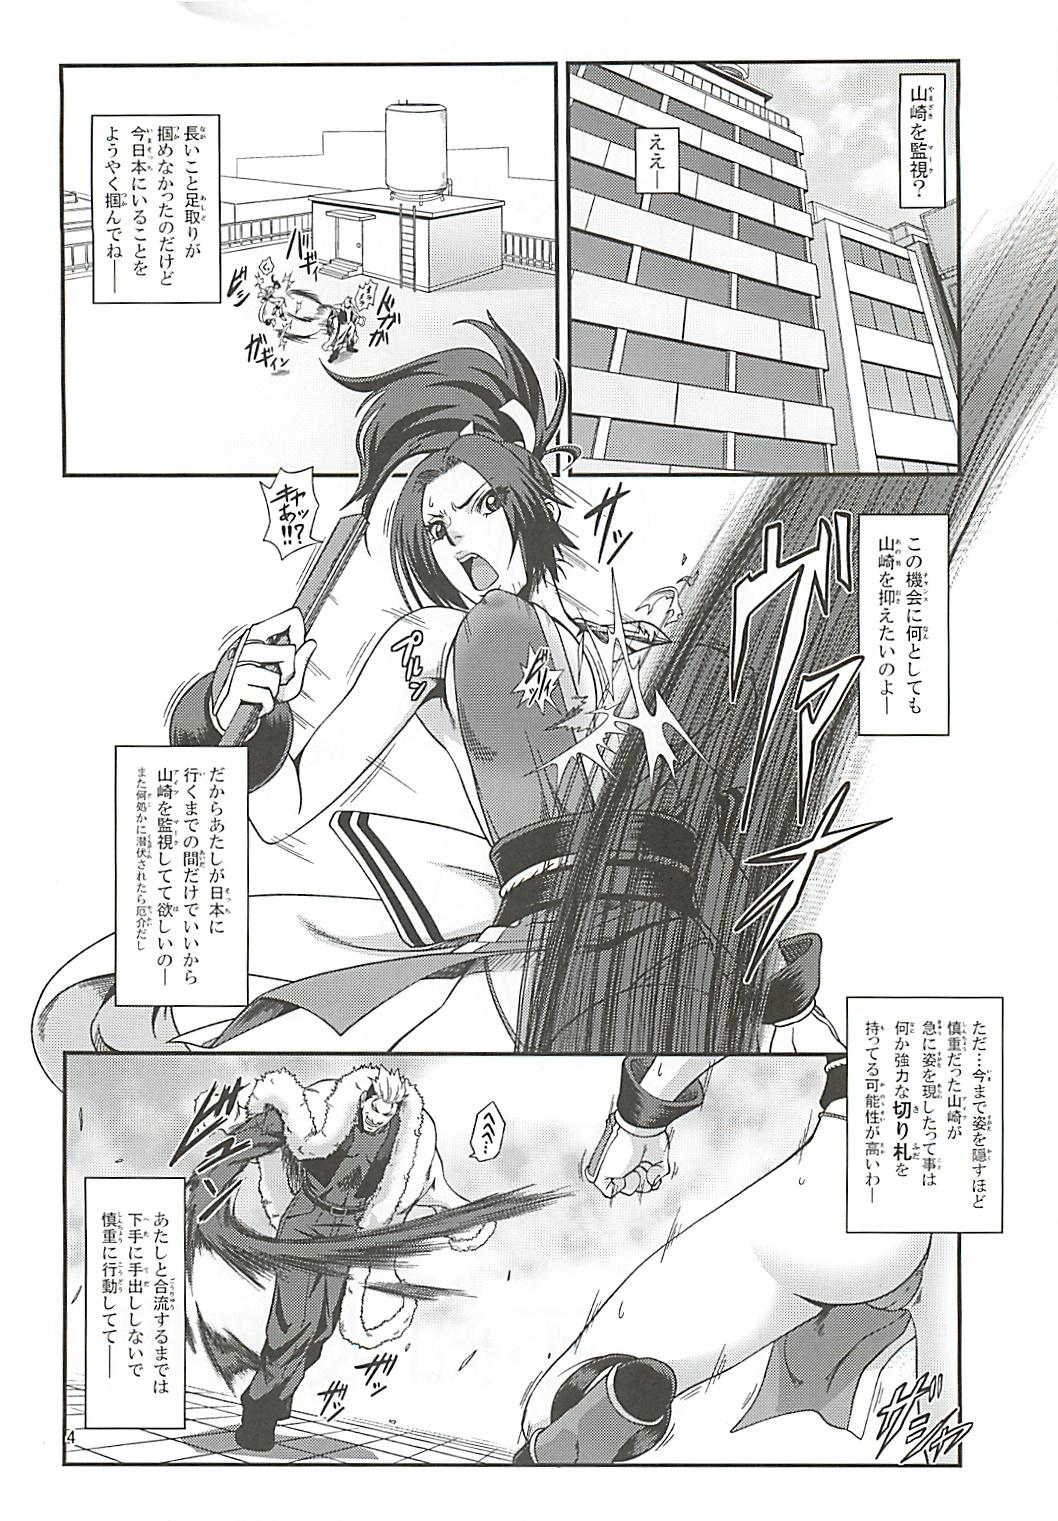 Shaven Shiranui Muzan 2 - King of fighters Stranger - Page 3